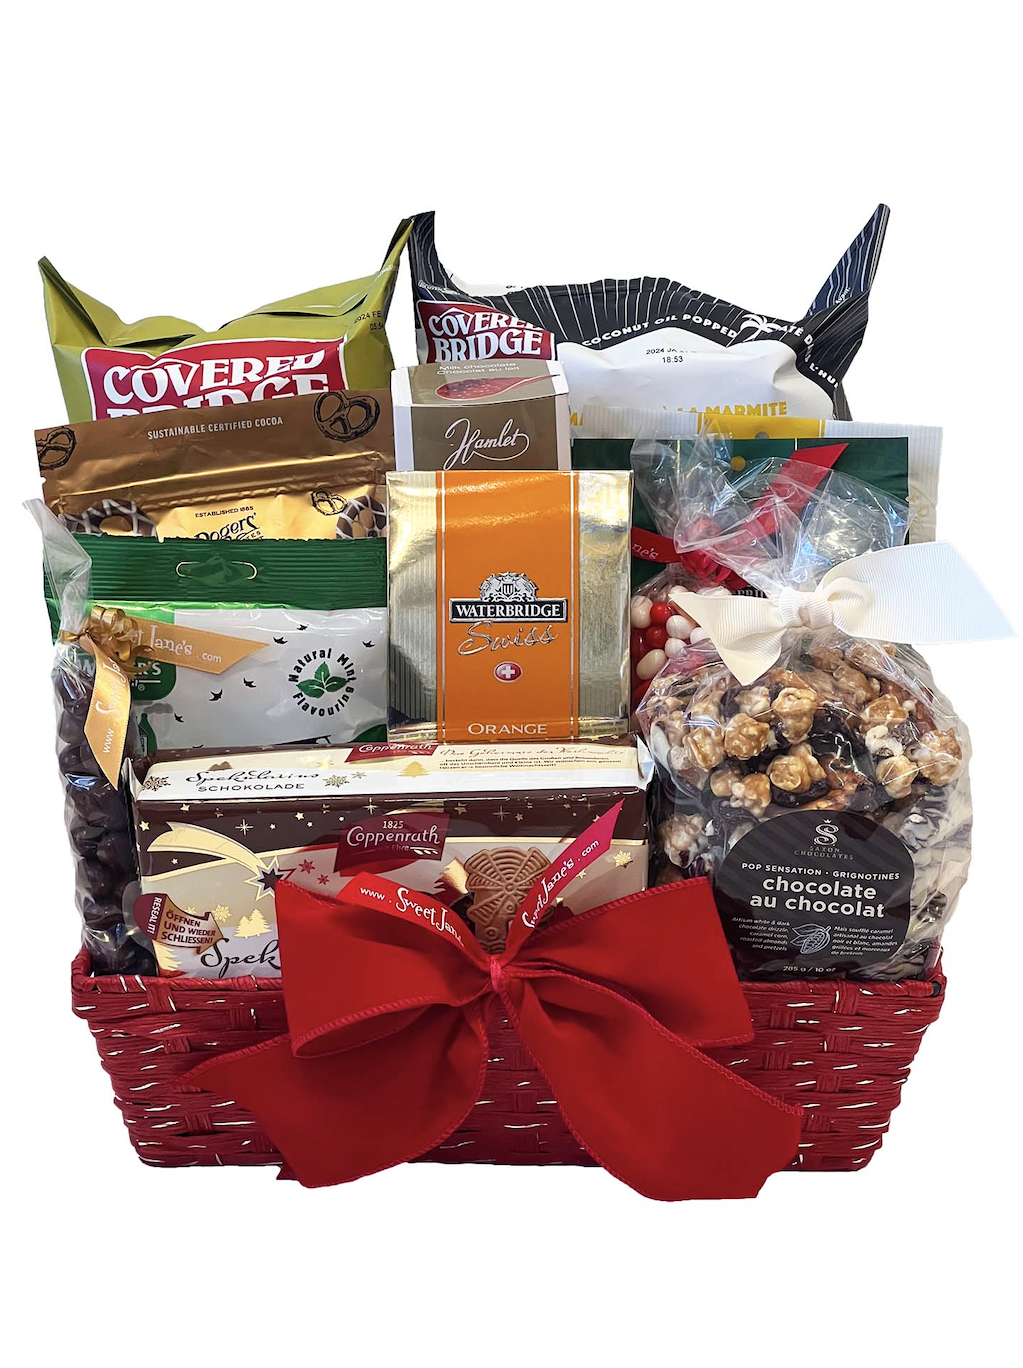 Happy Holidays Gift Basket | Chocolate Covered Gluten Free Pretzels [4 Flavors] Gourmet Holiday Gift | Same Day Delivery Items for Christmas, New